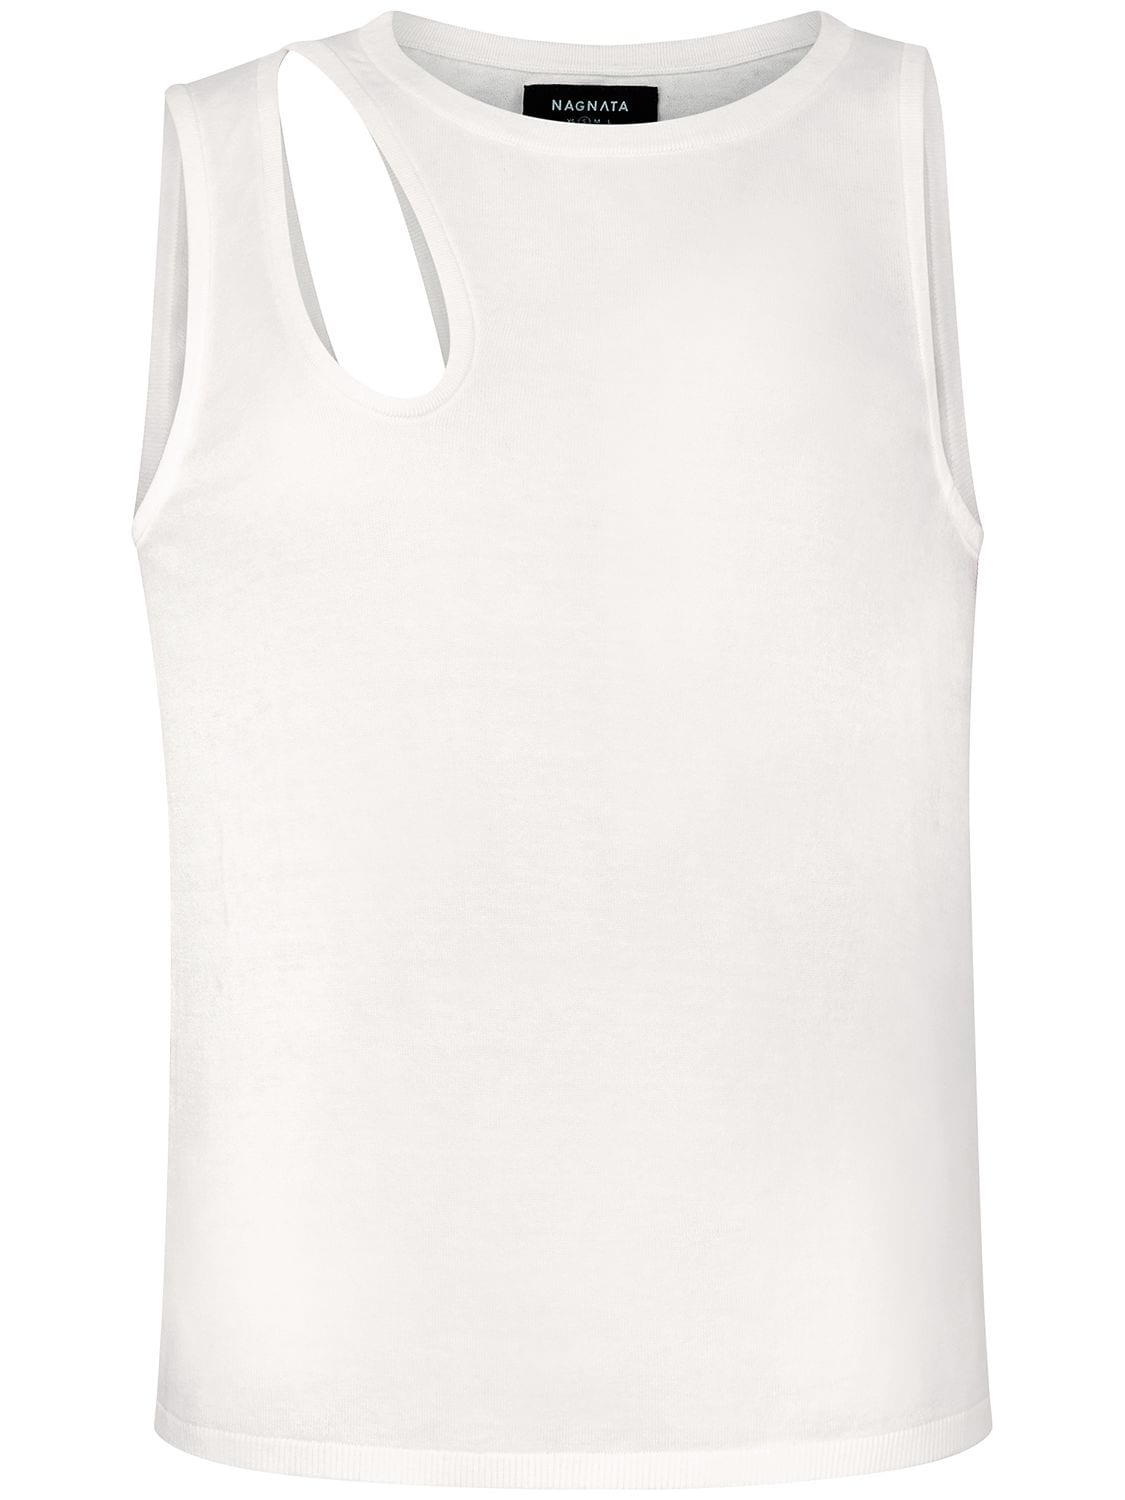 Image of Highlighter Cotton Tank Top